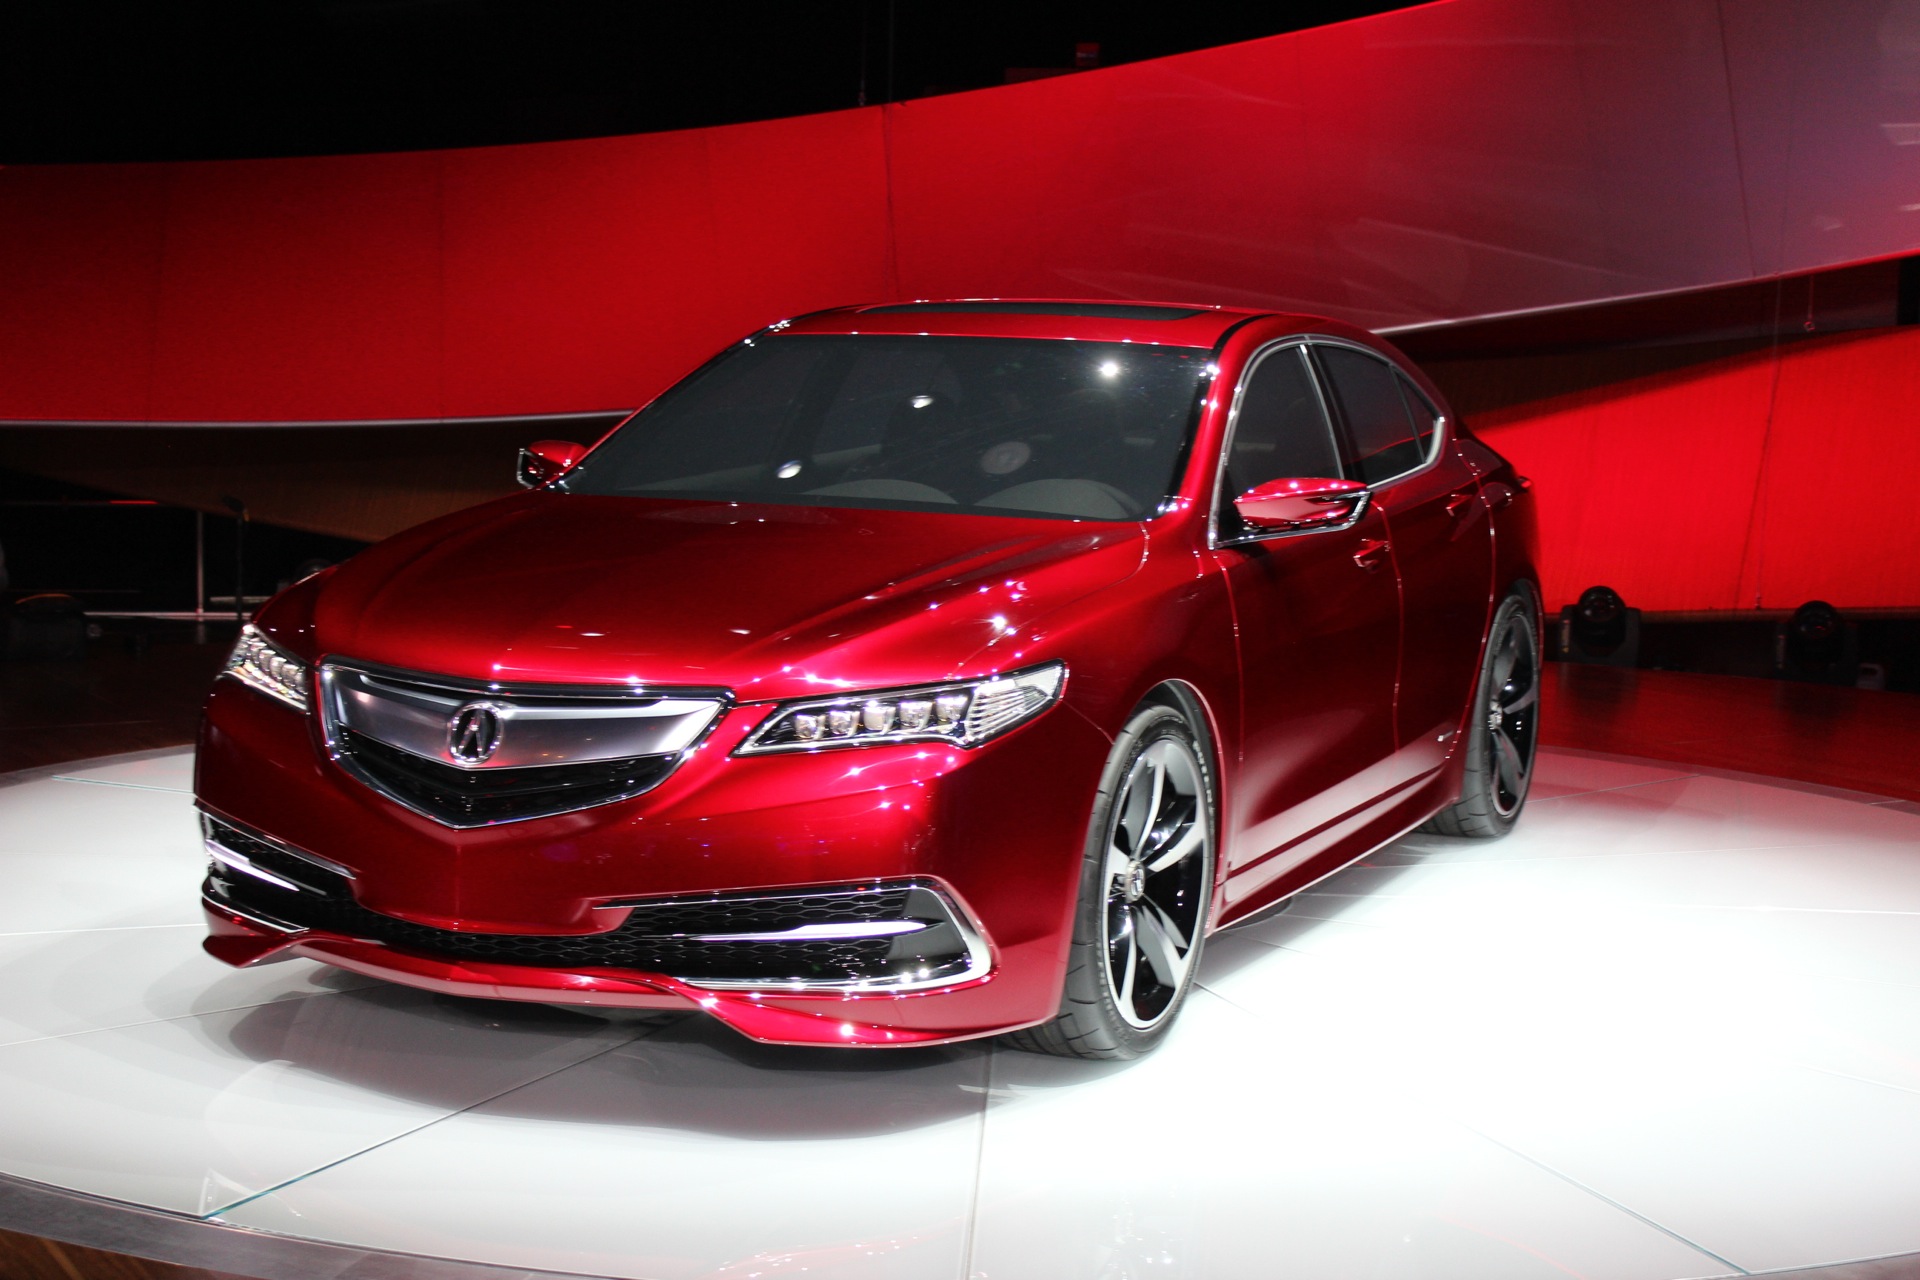 2015 Acura Tlx Prototype Full Details Live Photos Video